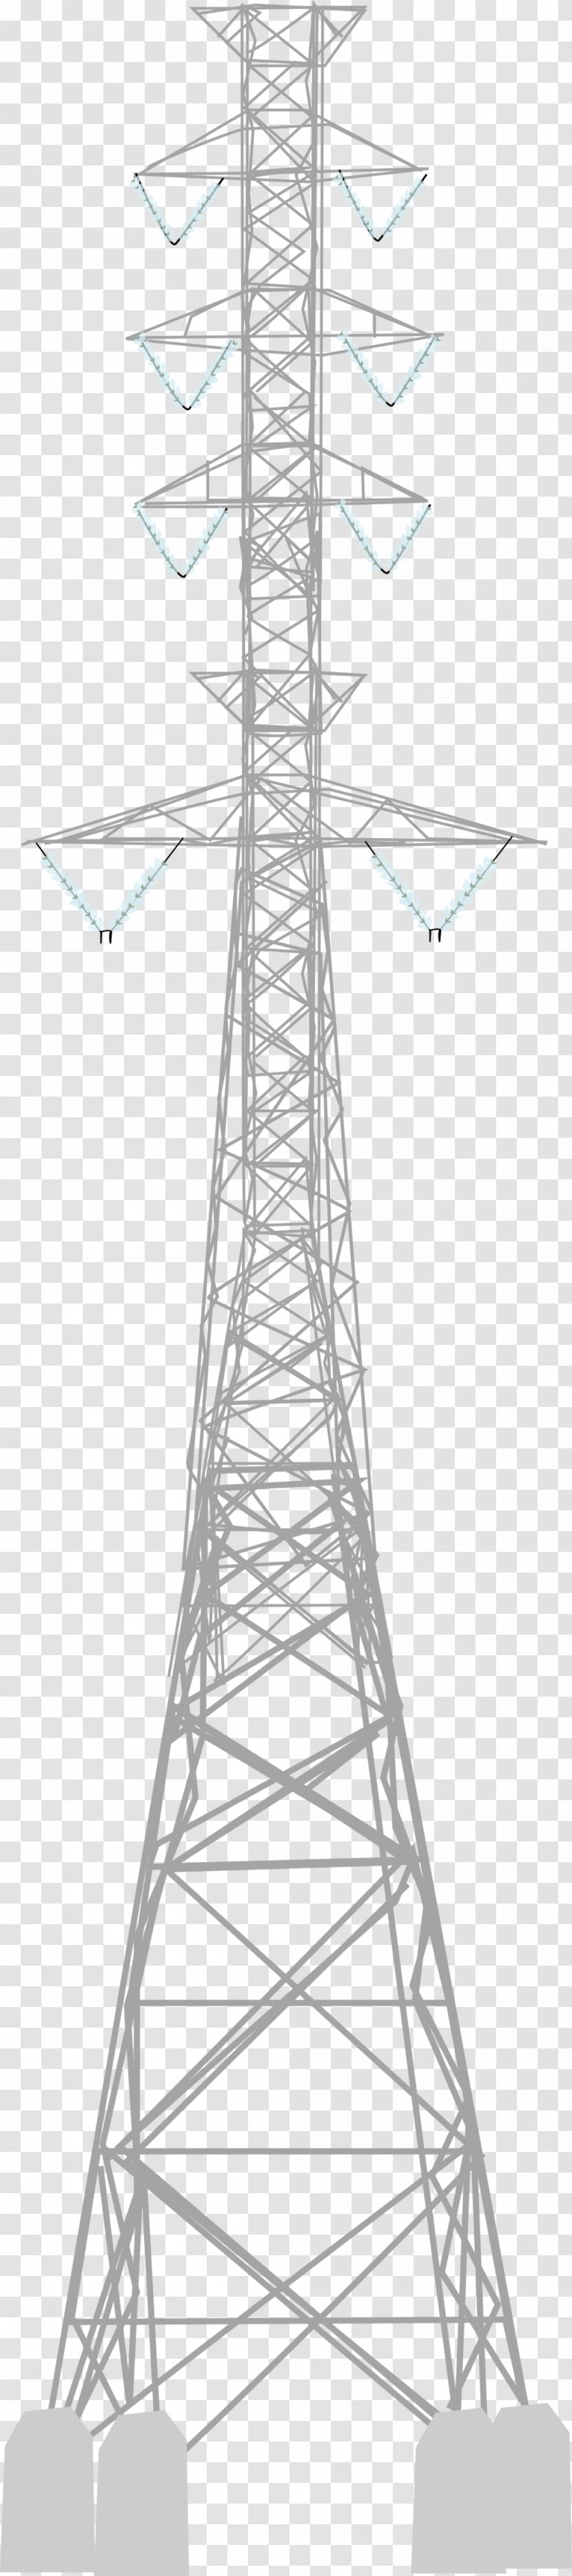 Transmission Tower Electricity Drawing Public Utility - Design Transparent PNG